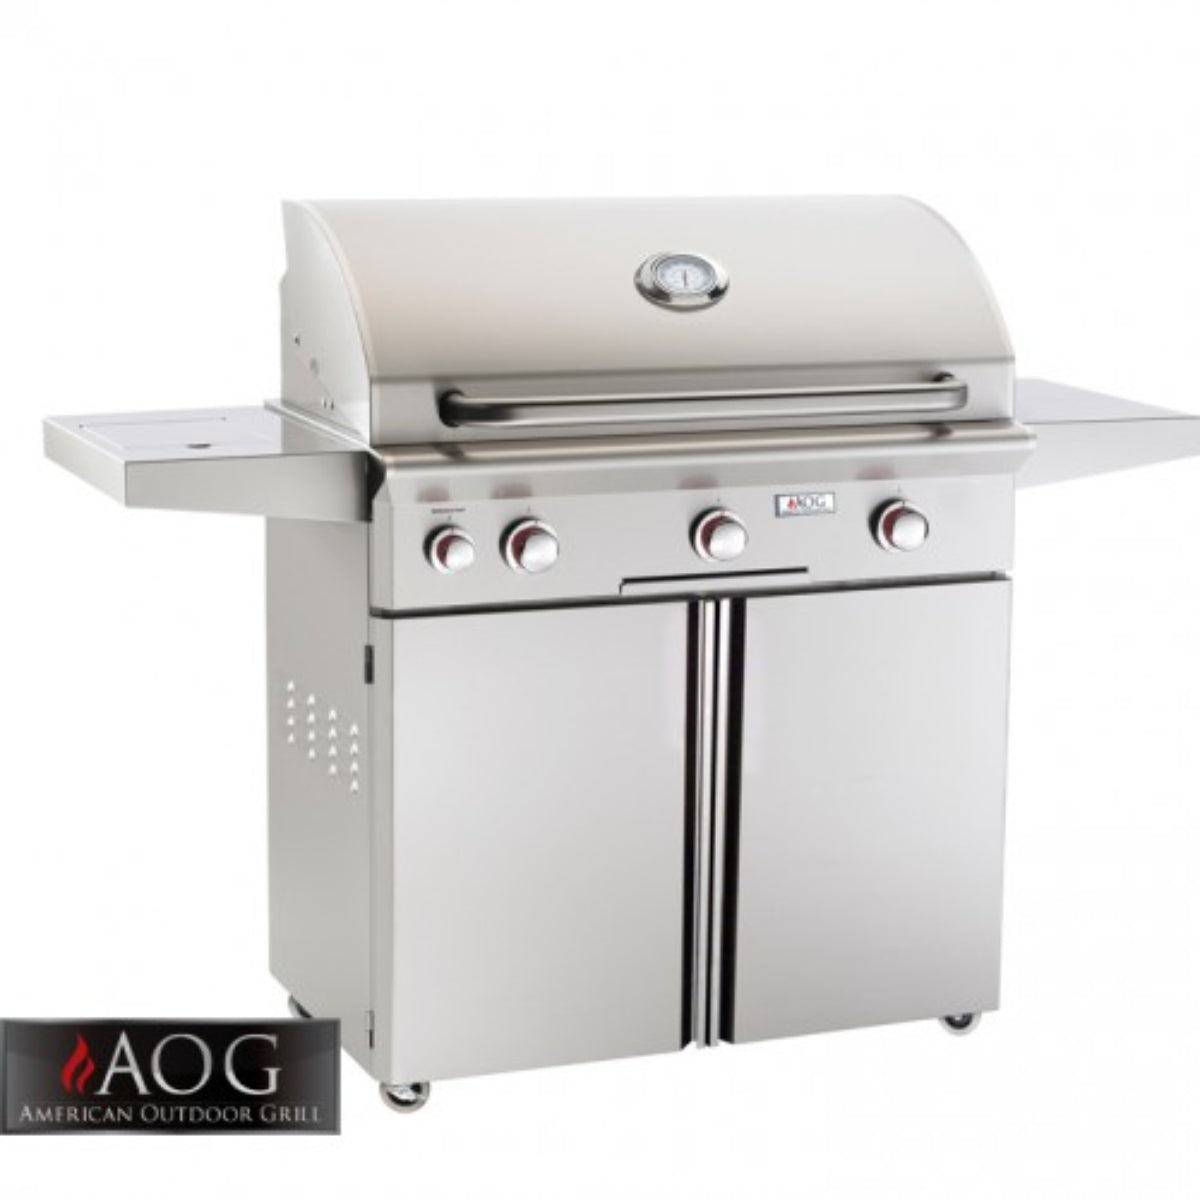 American Outdoor Grill 36PCT-00SP 36" T Series Portable Grill - Upper Livin